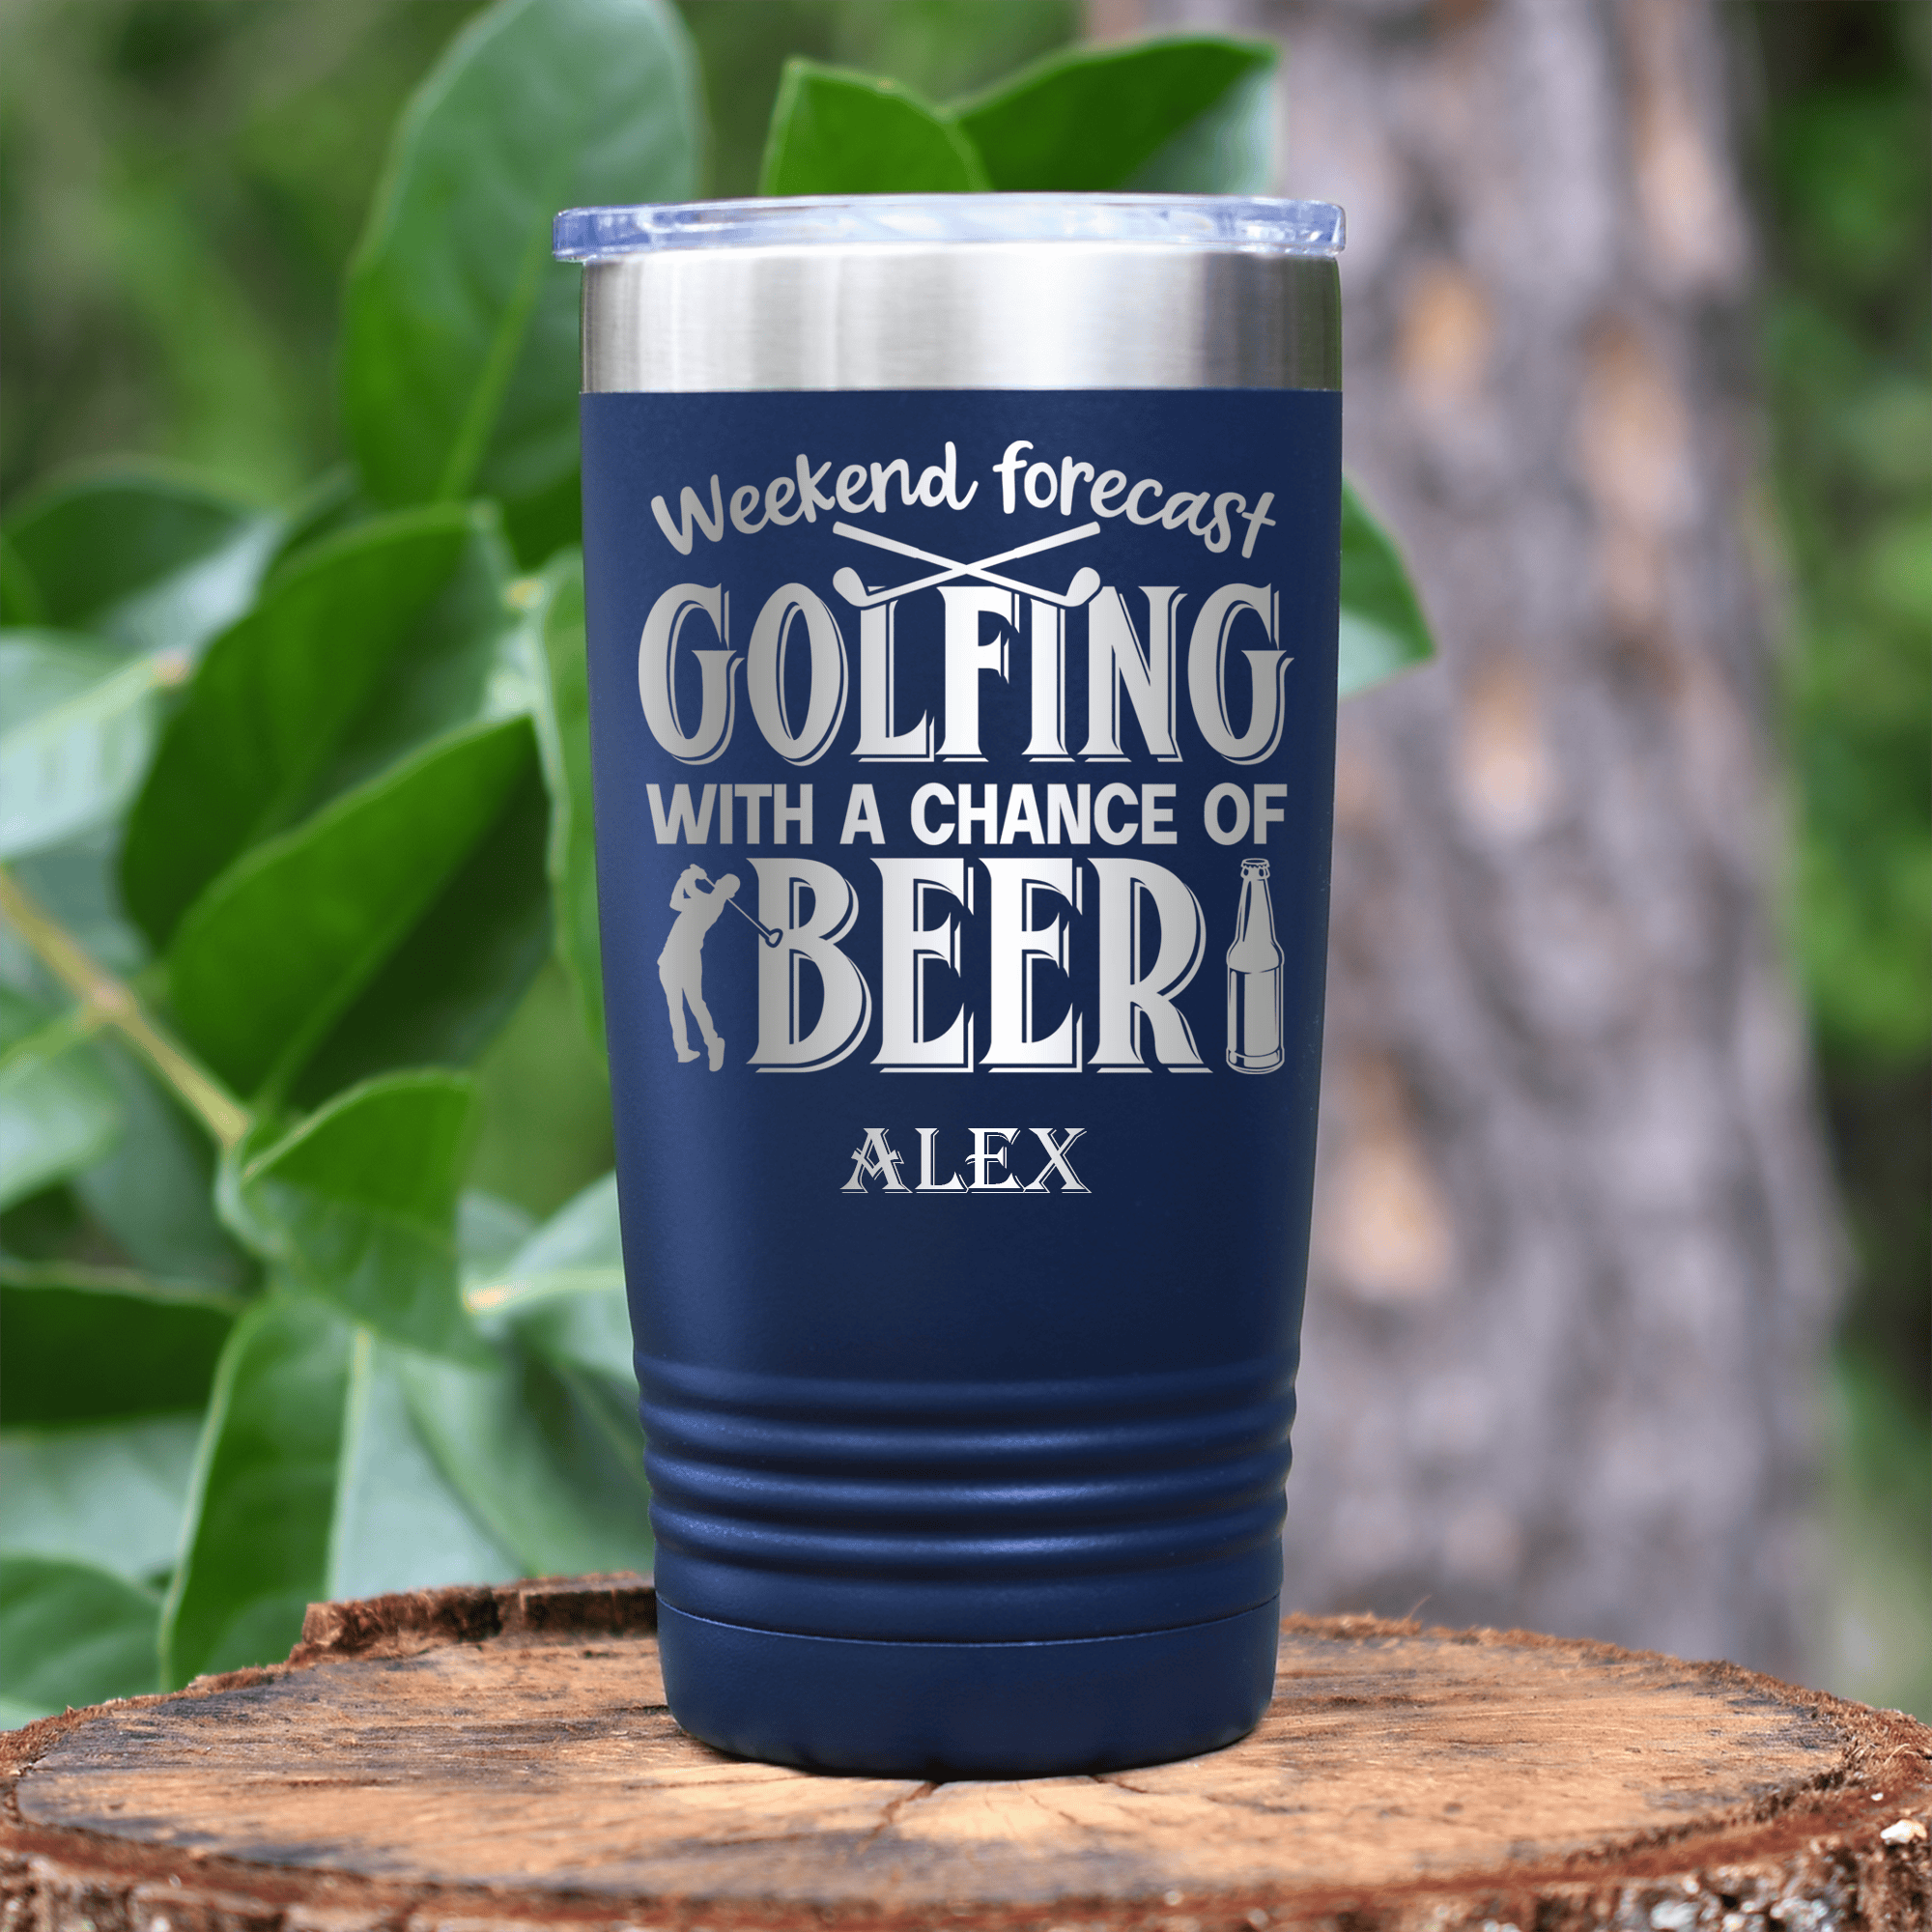 Navy Golf Tumbler With Weekend Forecast Golfing Design